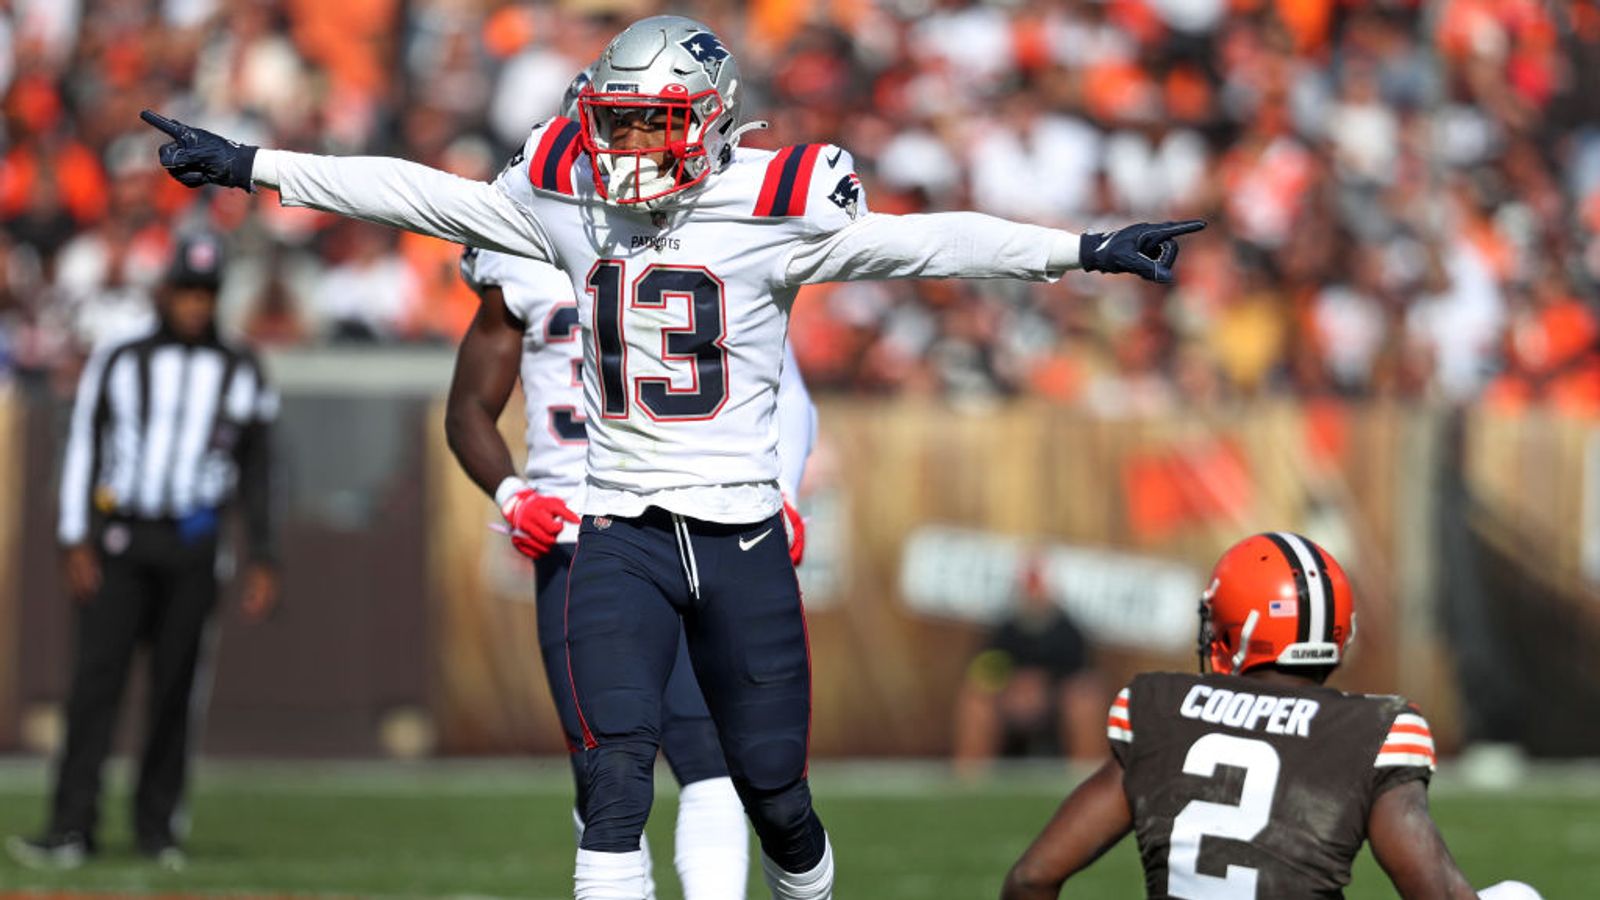 Bedard: What are the Patriots' options at cornerback if Jack Jones is  released/not available?